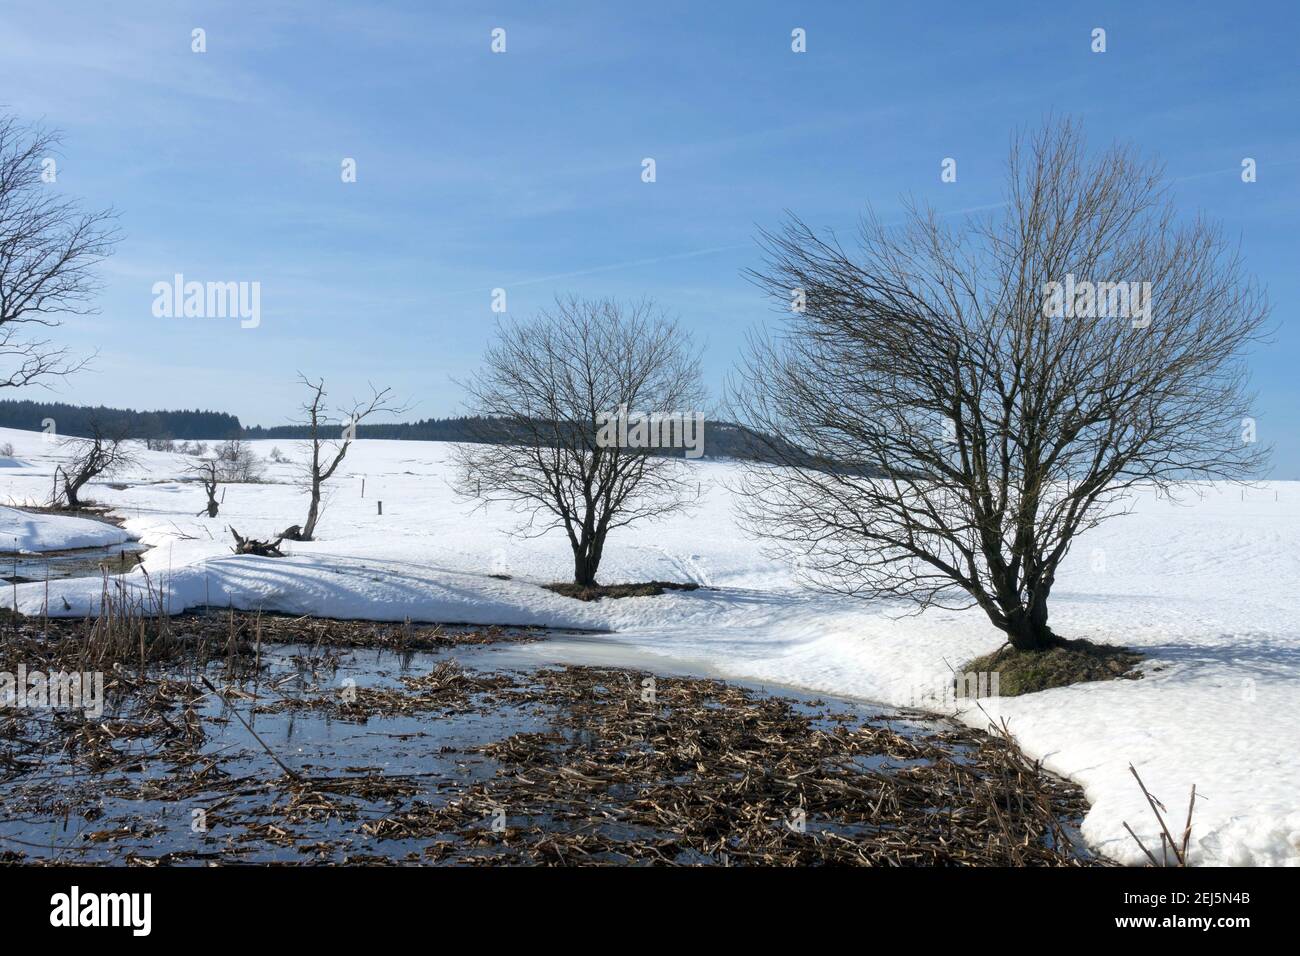 Melting snow and shrubs growing on the shore of a small pond, snow covered scene Stock Photo